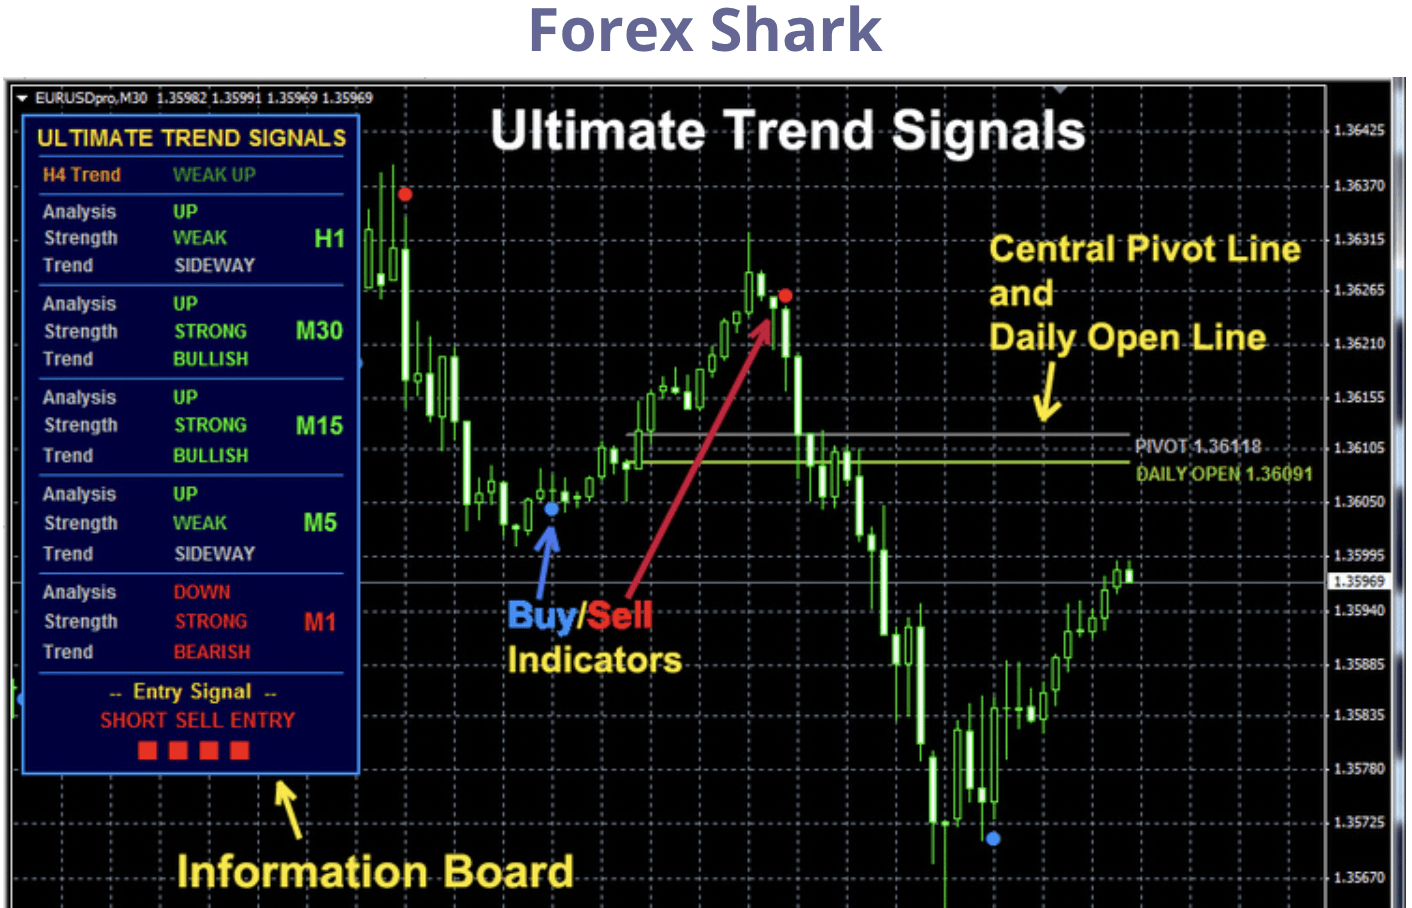 Forex free signal providers forex strategies by session